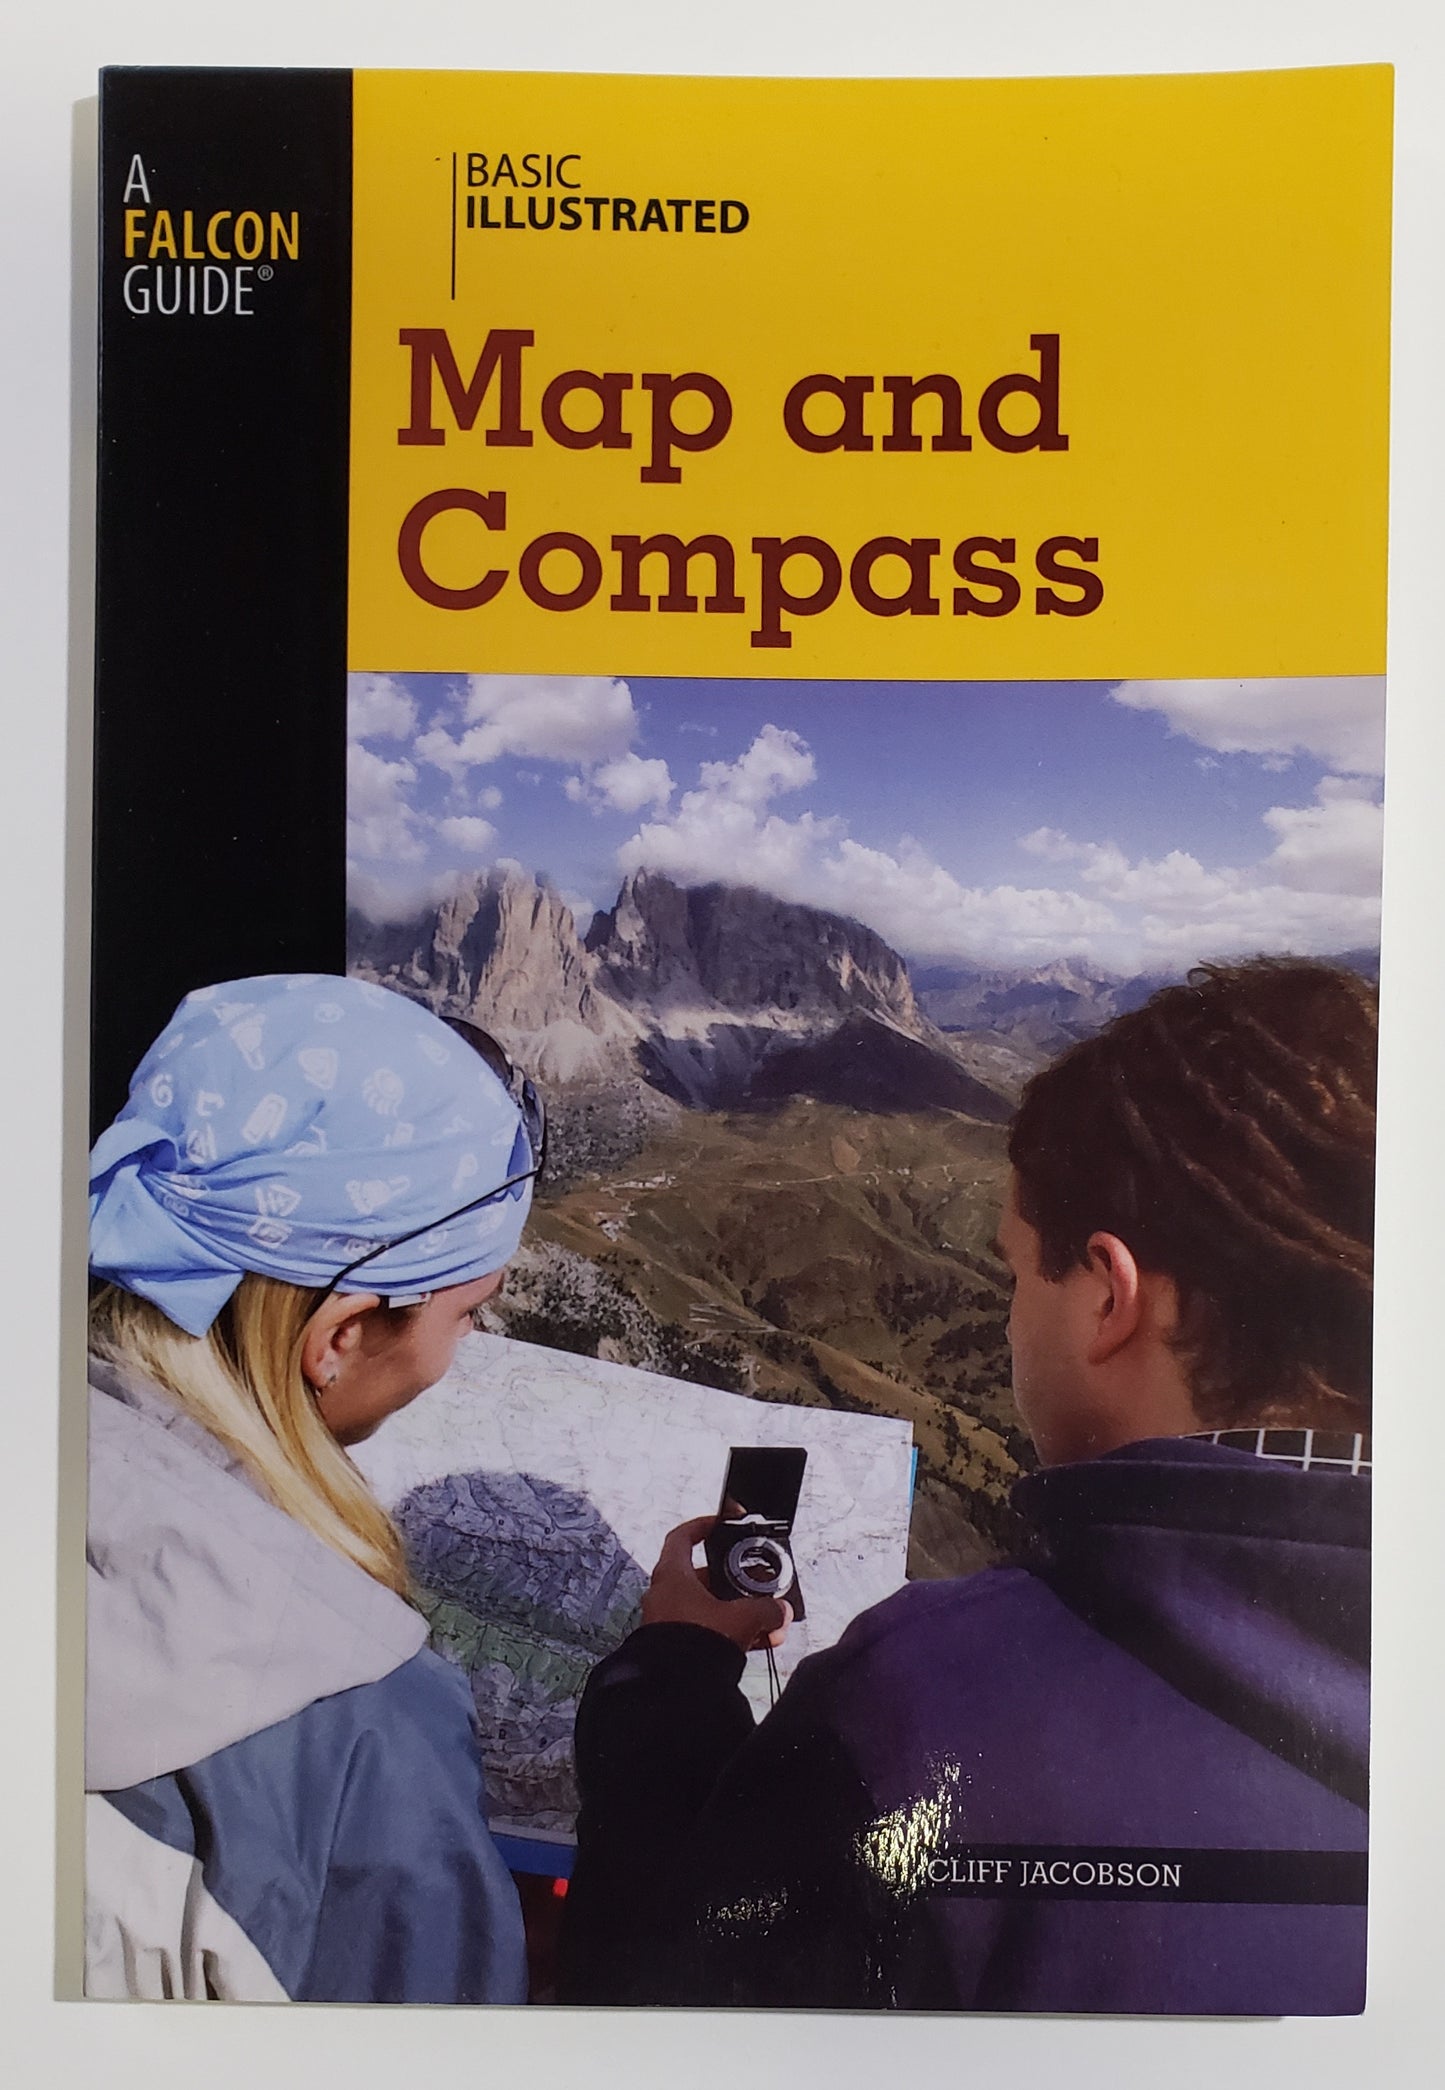 Basic Illustrated - Map and Compass